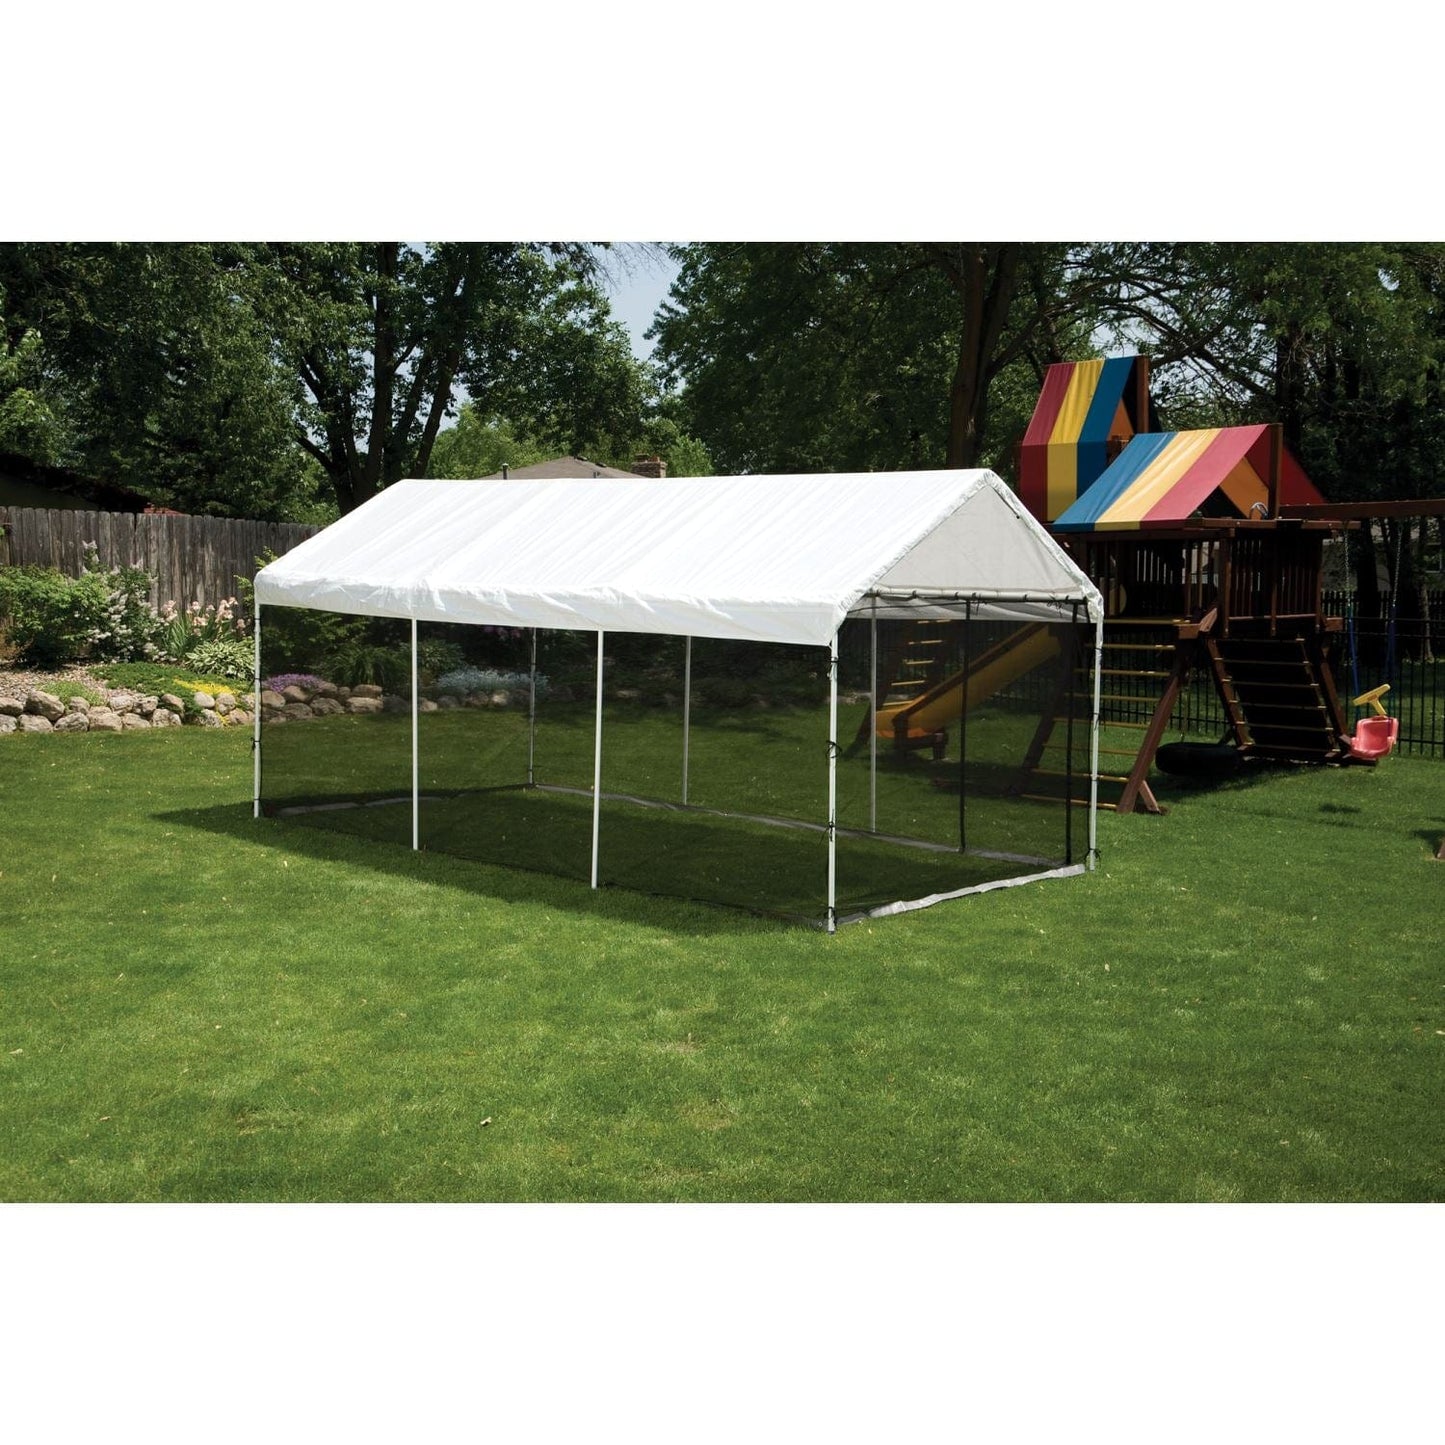 ShelterLogic Canopy Enclosure Kit ShelterLogic | Screen House Enclosure Kit for the MaxAP 10 ft. x 20 ft.  (Frame and Canopy Sold Separately) 25777